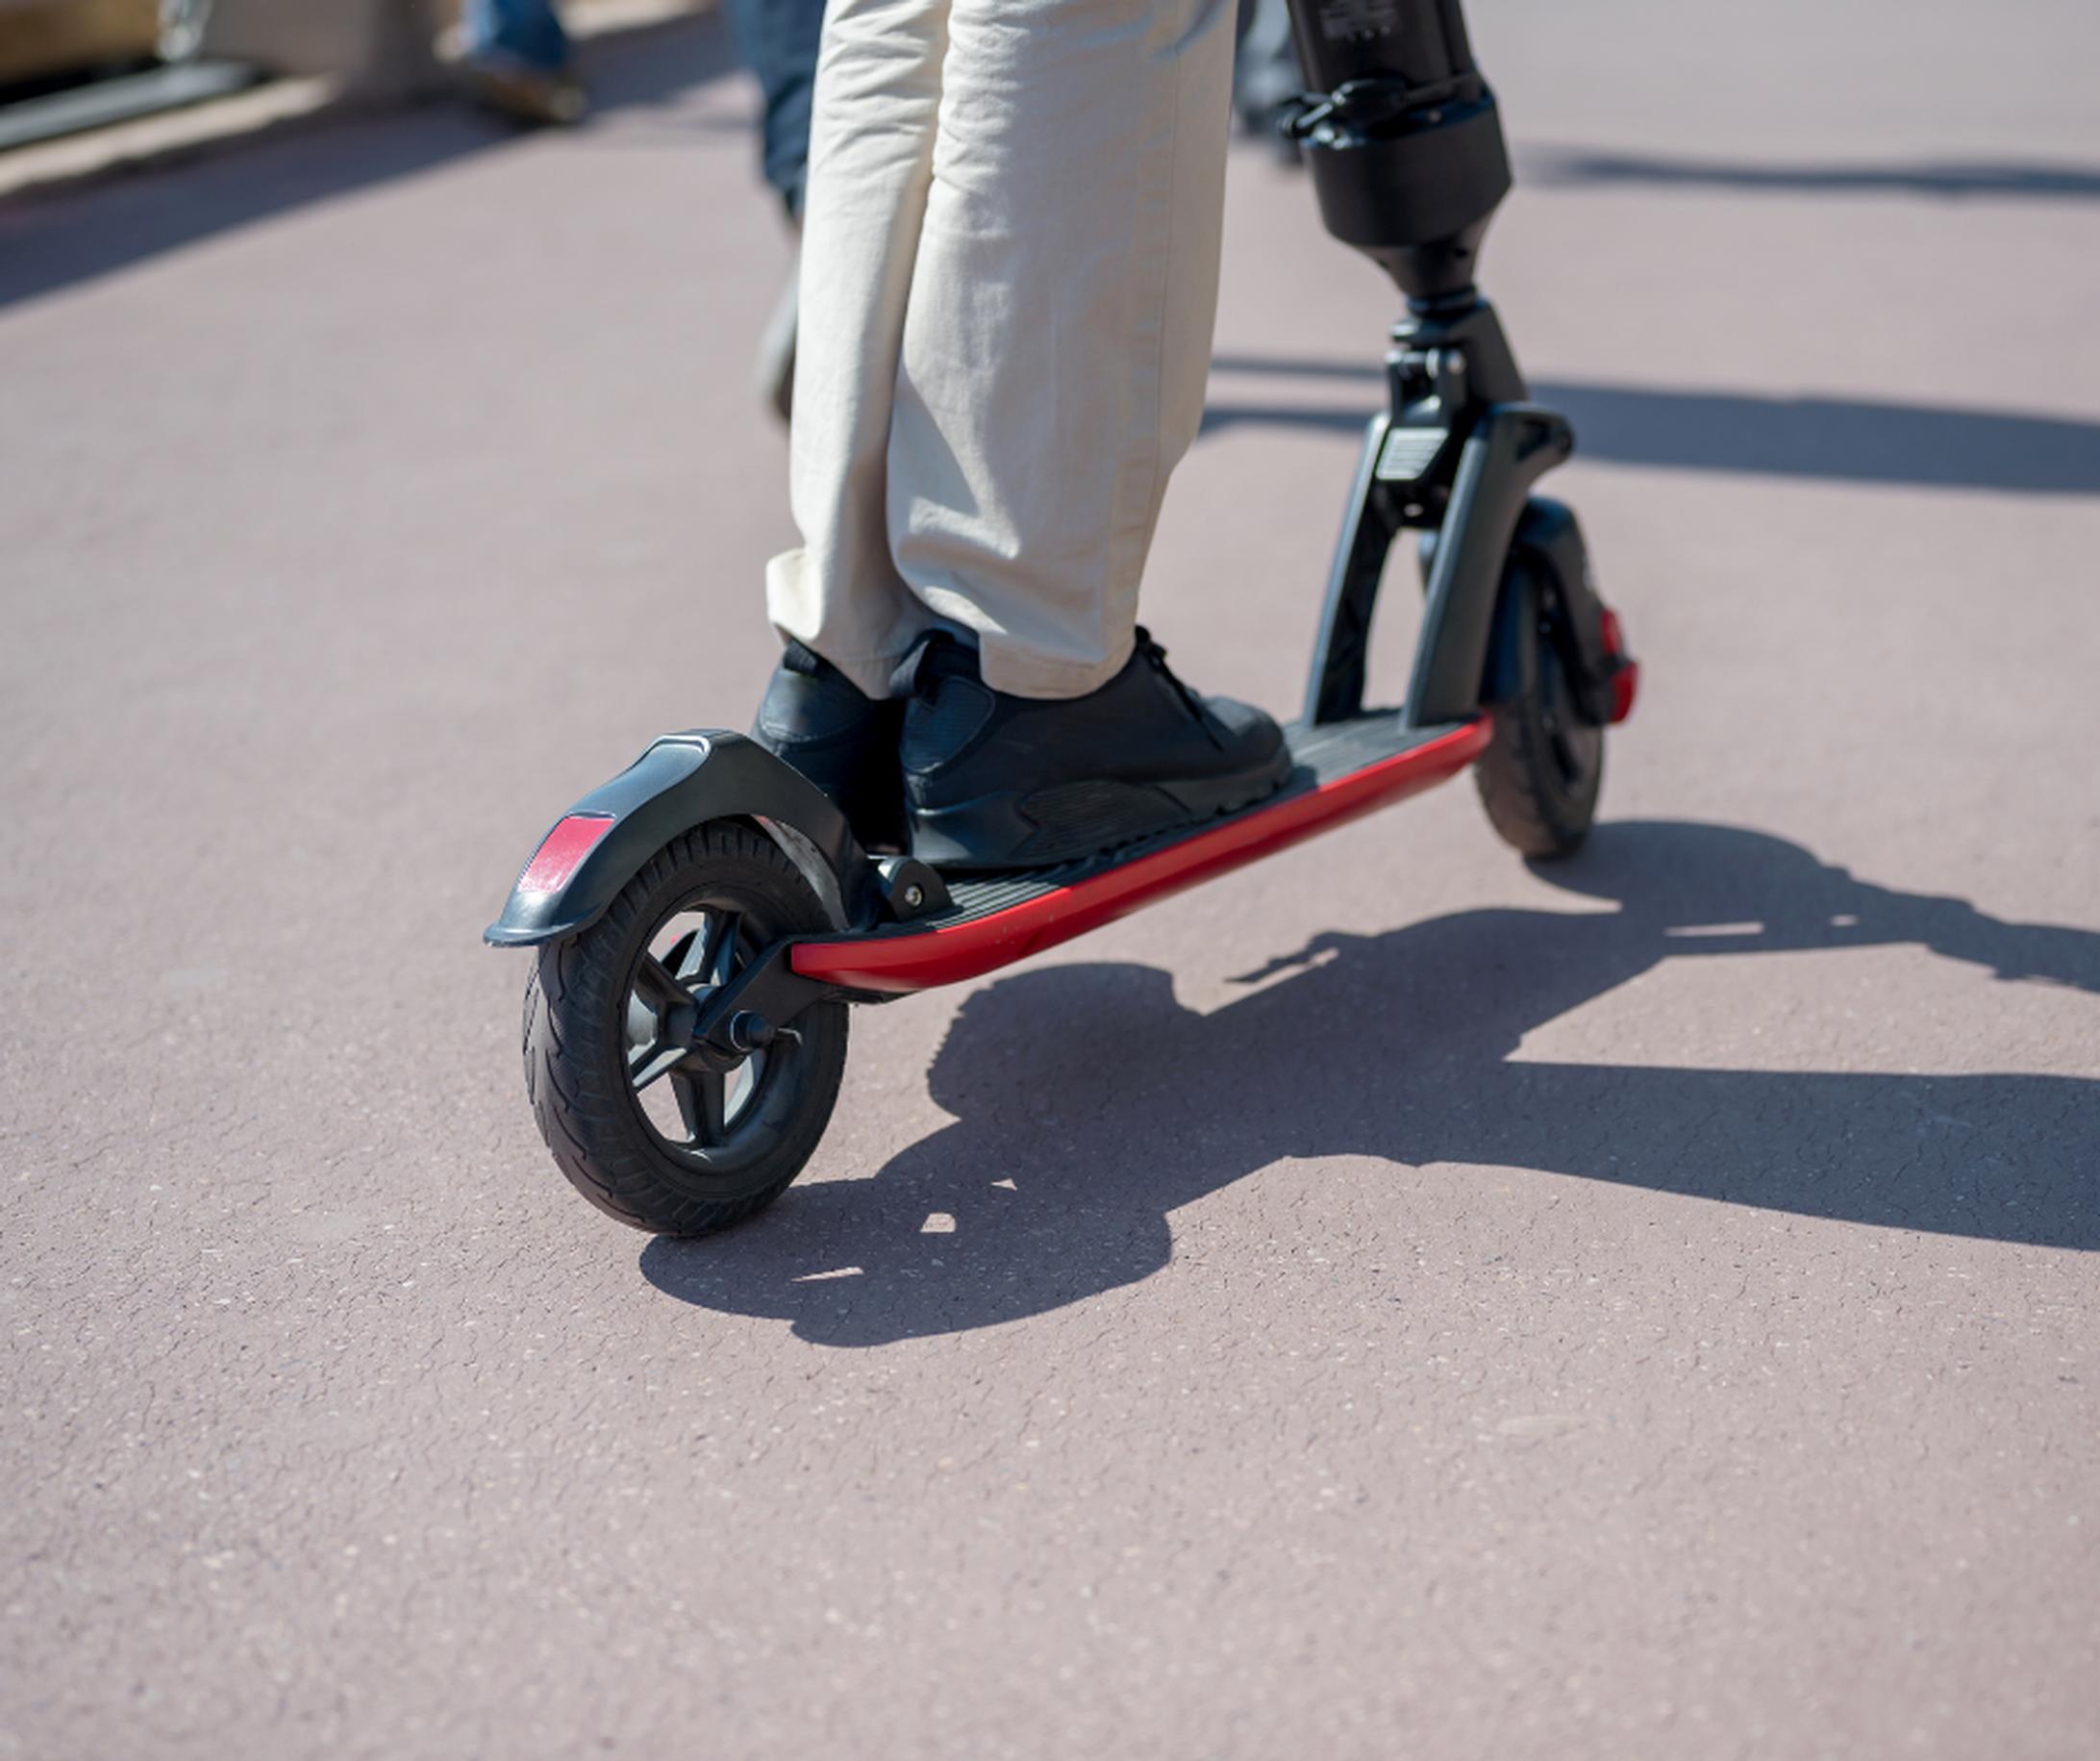 10 people died in e-scooter incidents during 2021